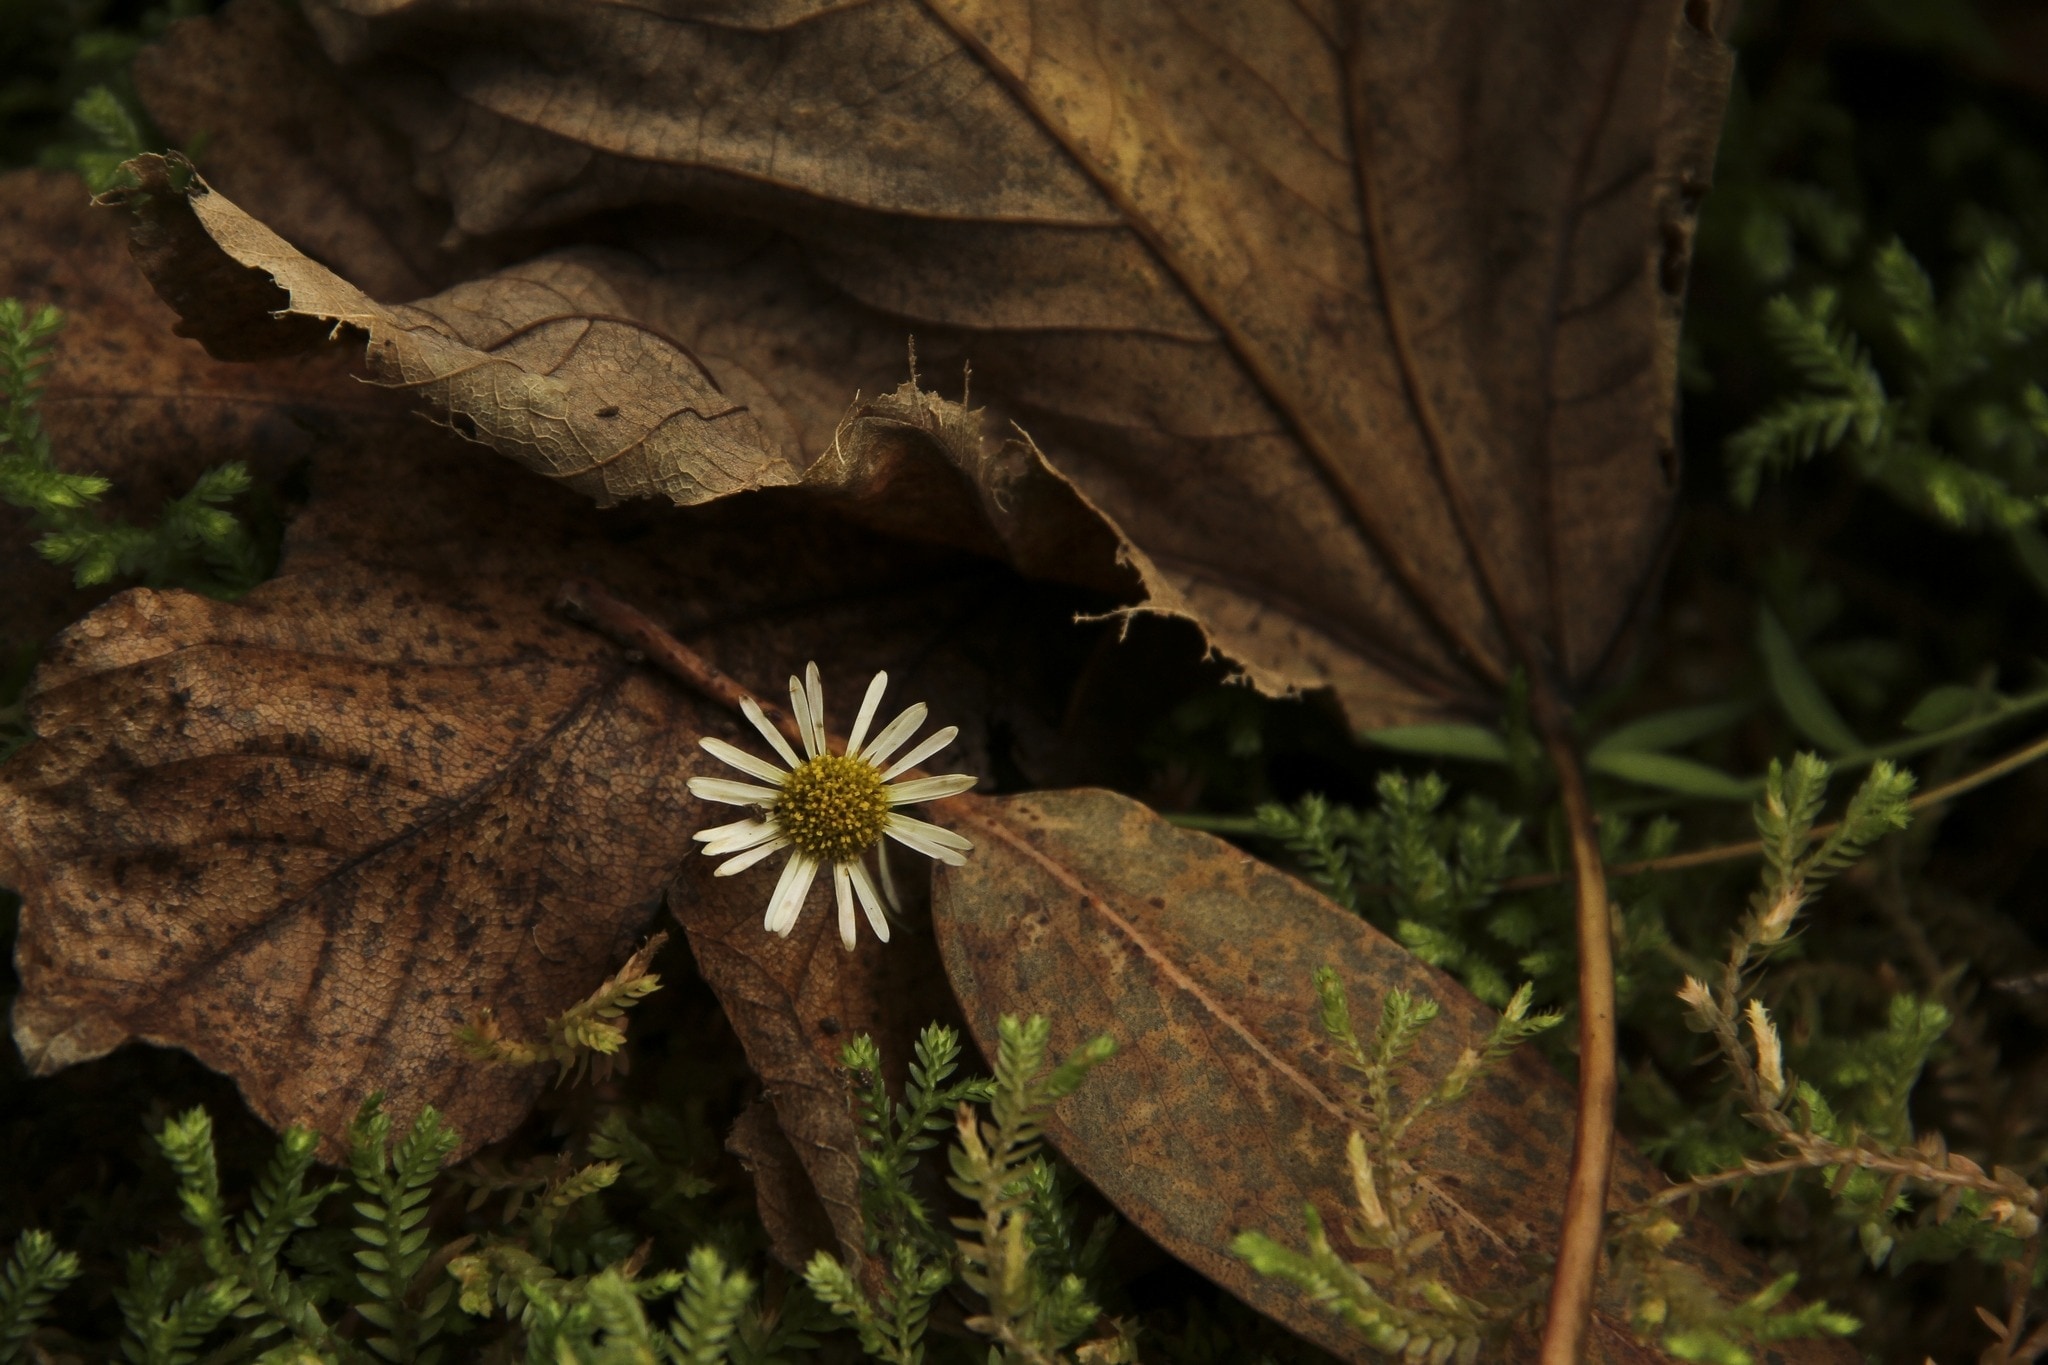 yellow daisy near a brown withered leaves